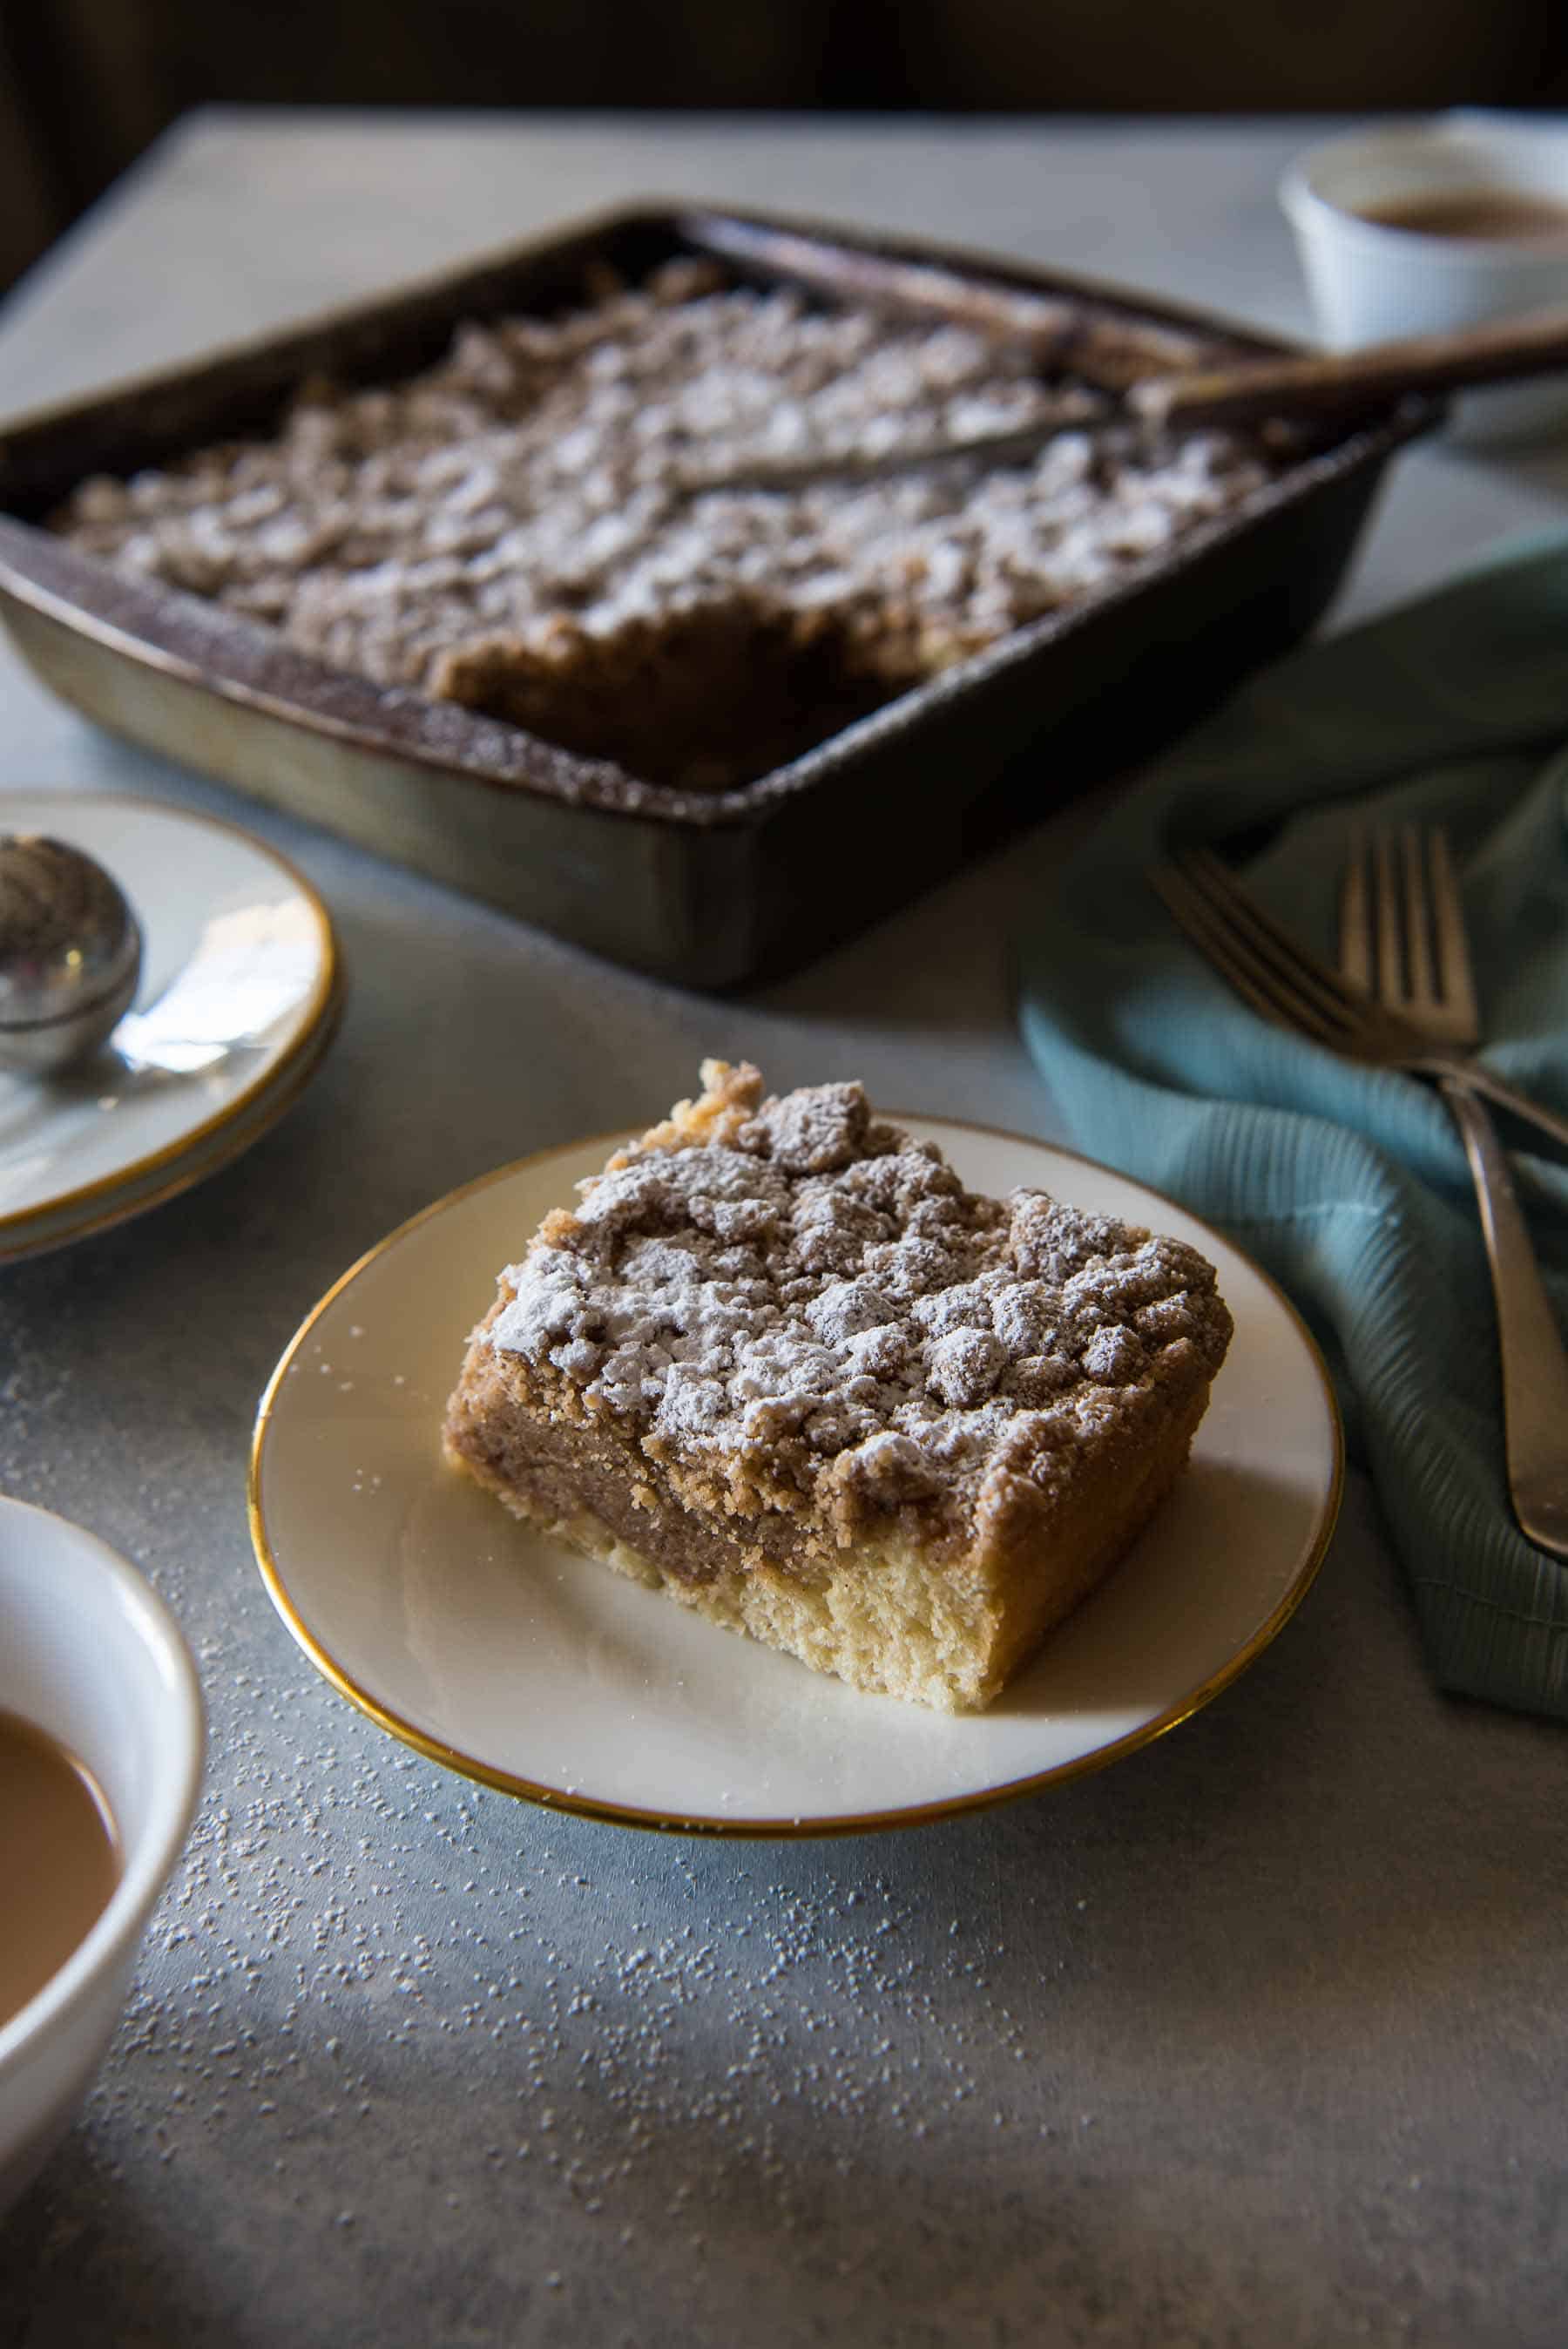 Perfect for breakfast, brunch, or as a midnight snack with a glass of milk, my Nana's New York Crumb Cake is a soft, sweet, satisfyingly crumby addition to your recipe repertoire!